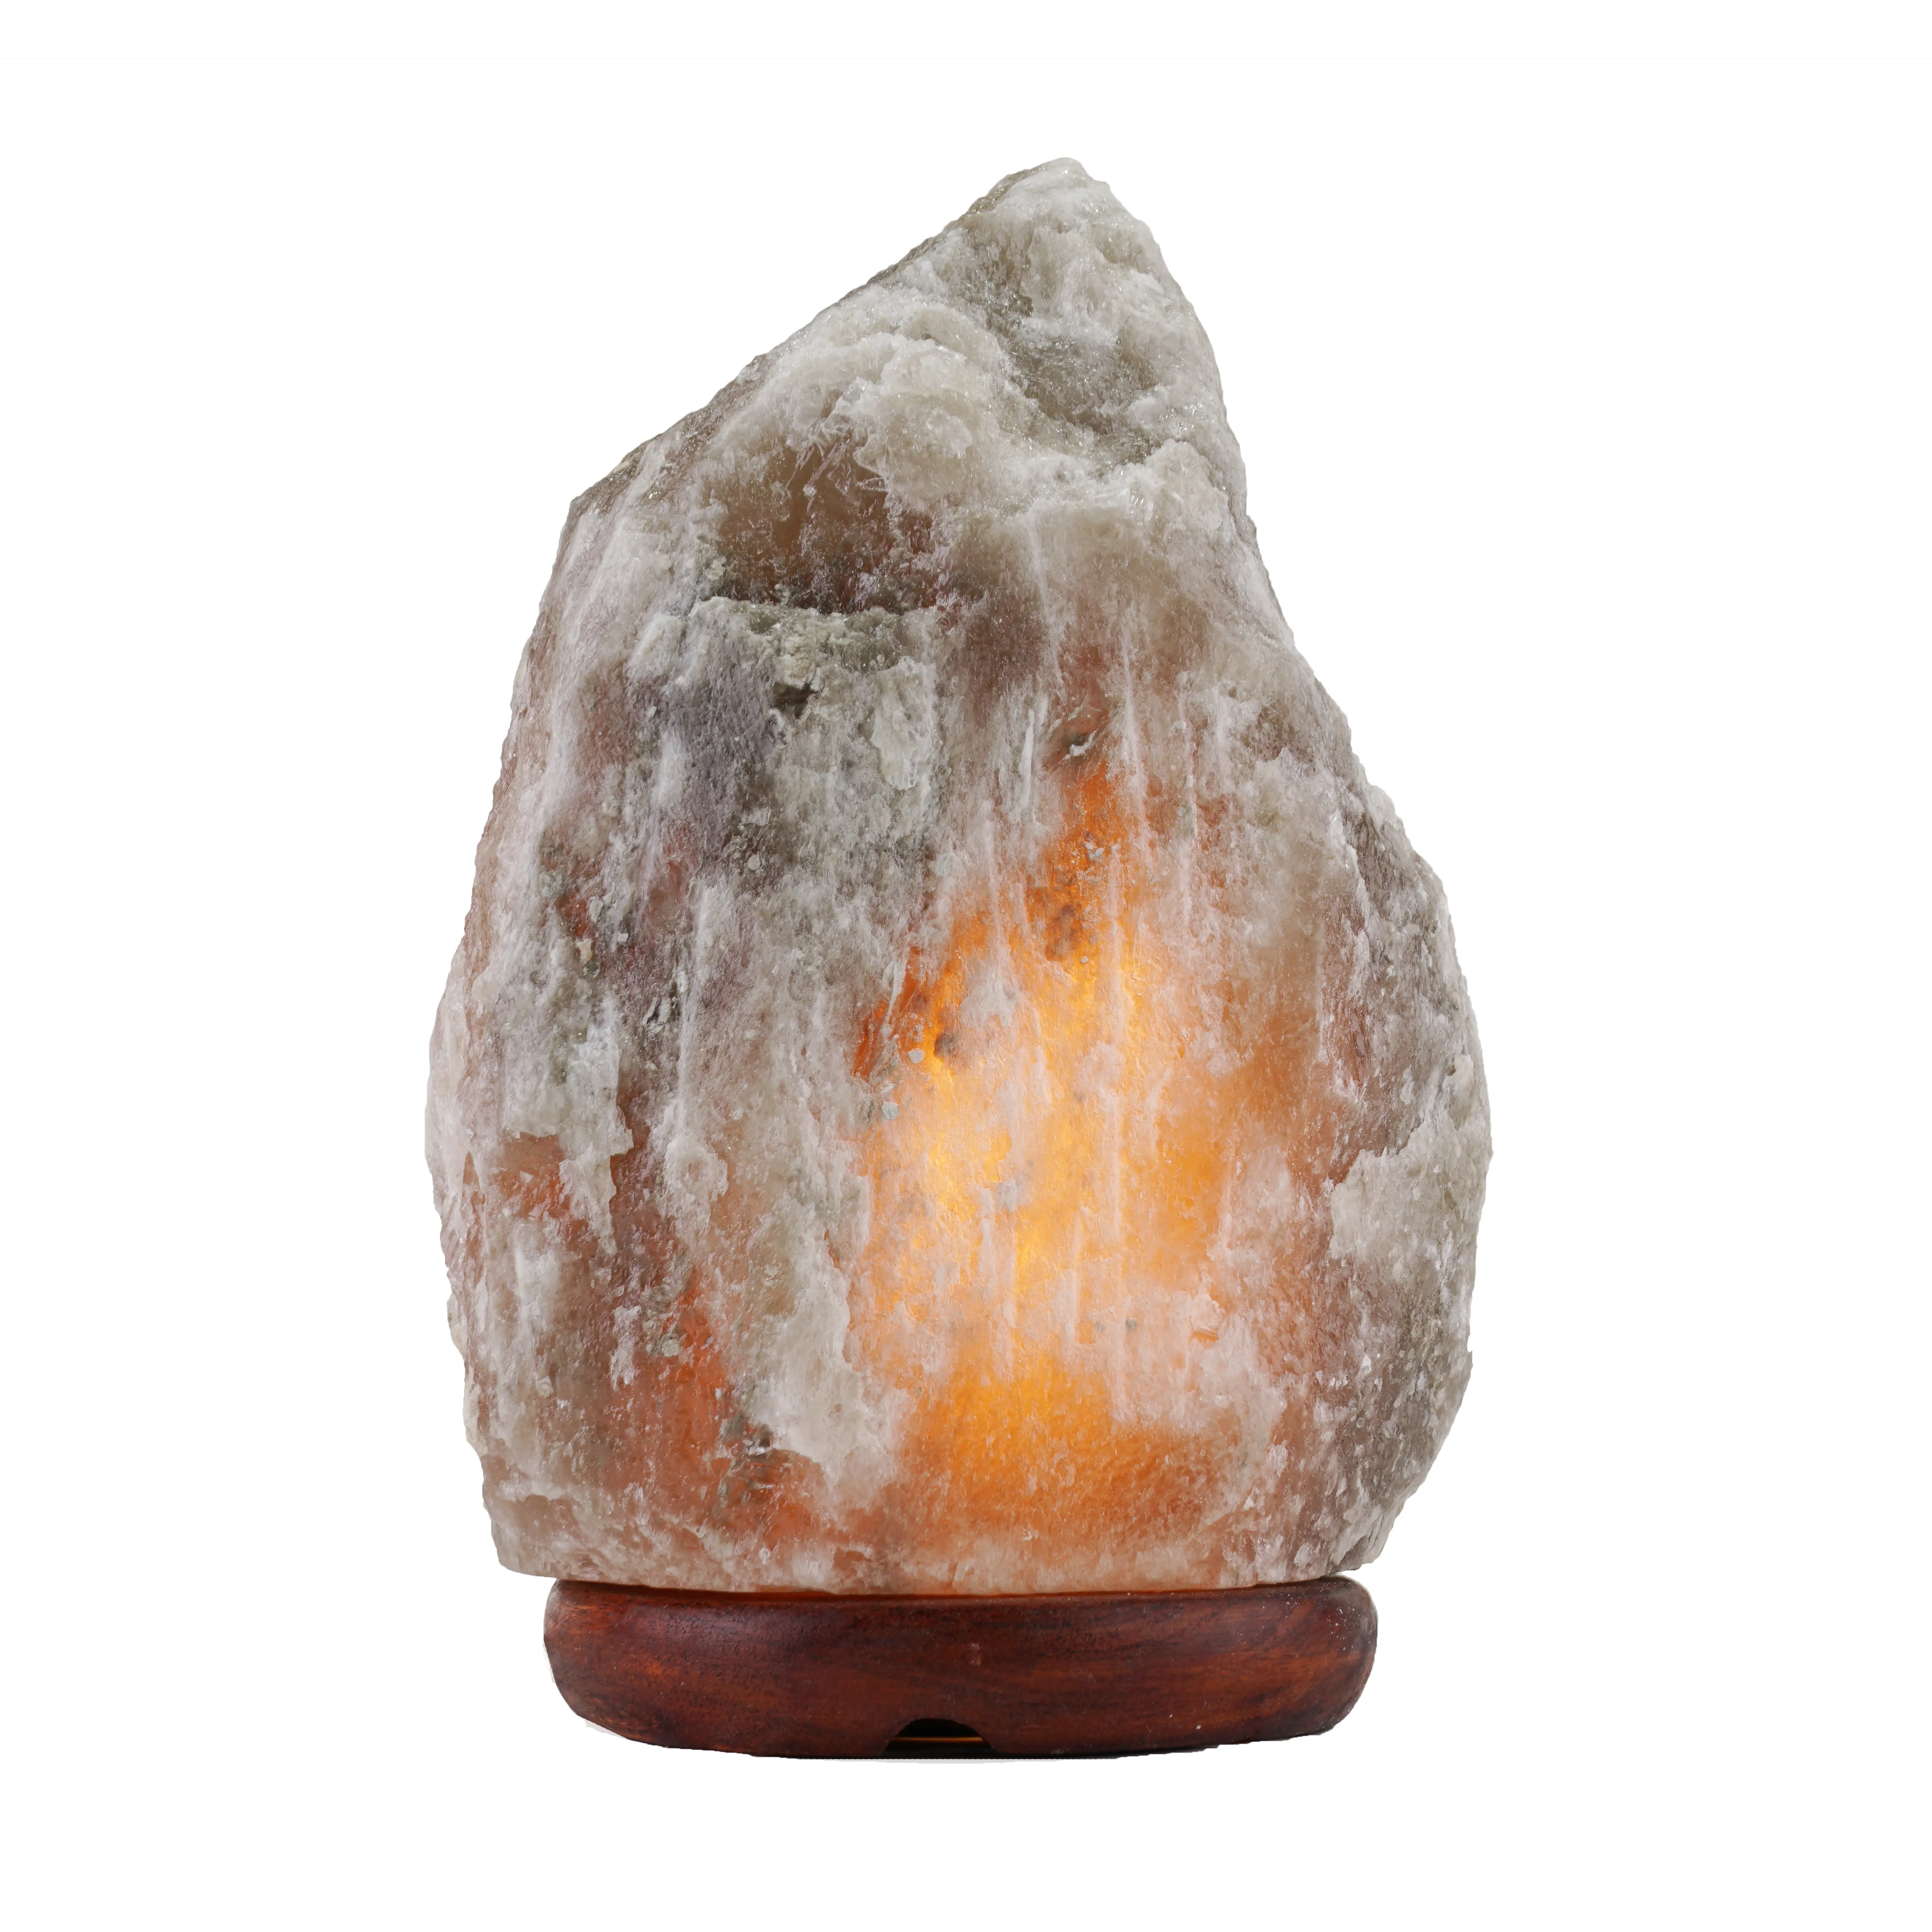 New Product Himalayan Salt Lamps Grey Large Size Rock Salt Lamp Natural Shape hand carved with dimmer switch and bulb